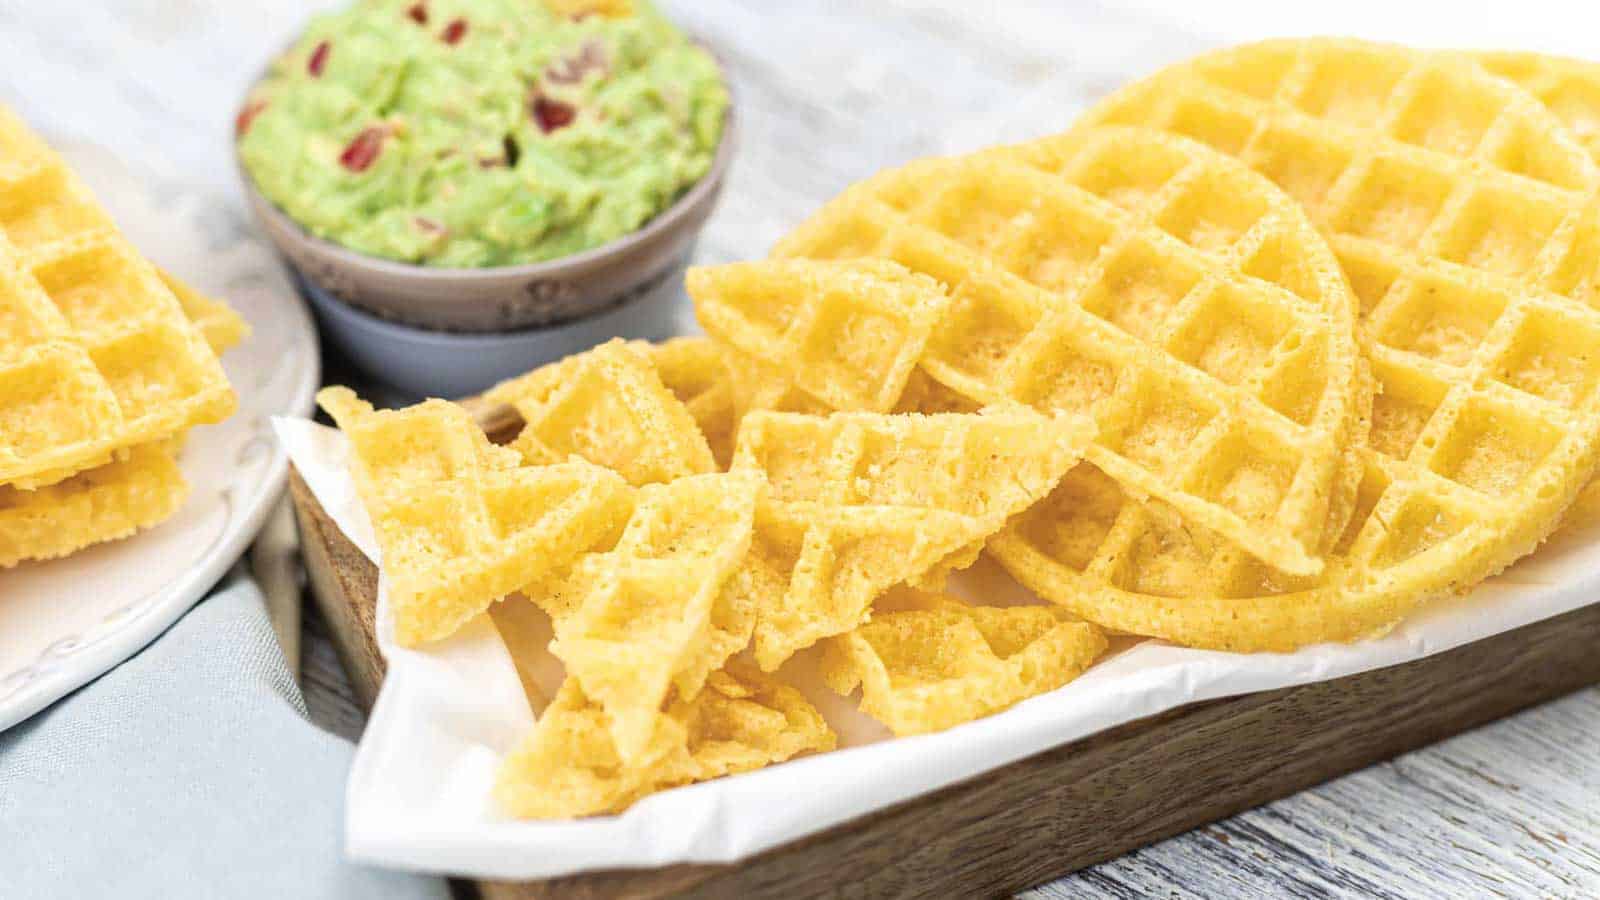 <p>Crispy Chaffle Chips are a revelation for anyone looking for a low-carb snack that doesn’t compromise on taste. They’re crispy, cheesy, and totally versatile – great for dipping or just on their own. They’re a modern twist on chips that’s sure to impress at your snack table.<br><strong>Get the Recipe: </strong><a href="https://www.lowcarb-nocarb.com/crispy-keto-chaffle-chips/?utm_source=msn&utm_medium=page&utm_campaign=msn">Crispy Chaffle Chips</a></p>